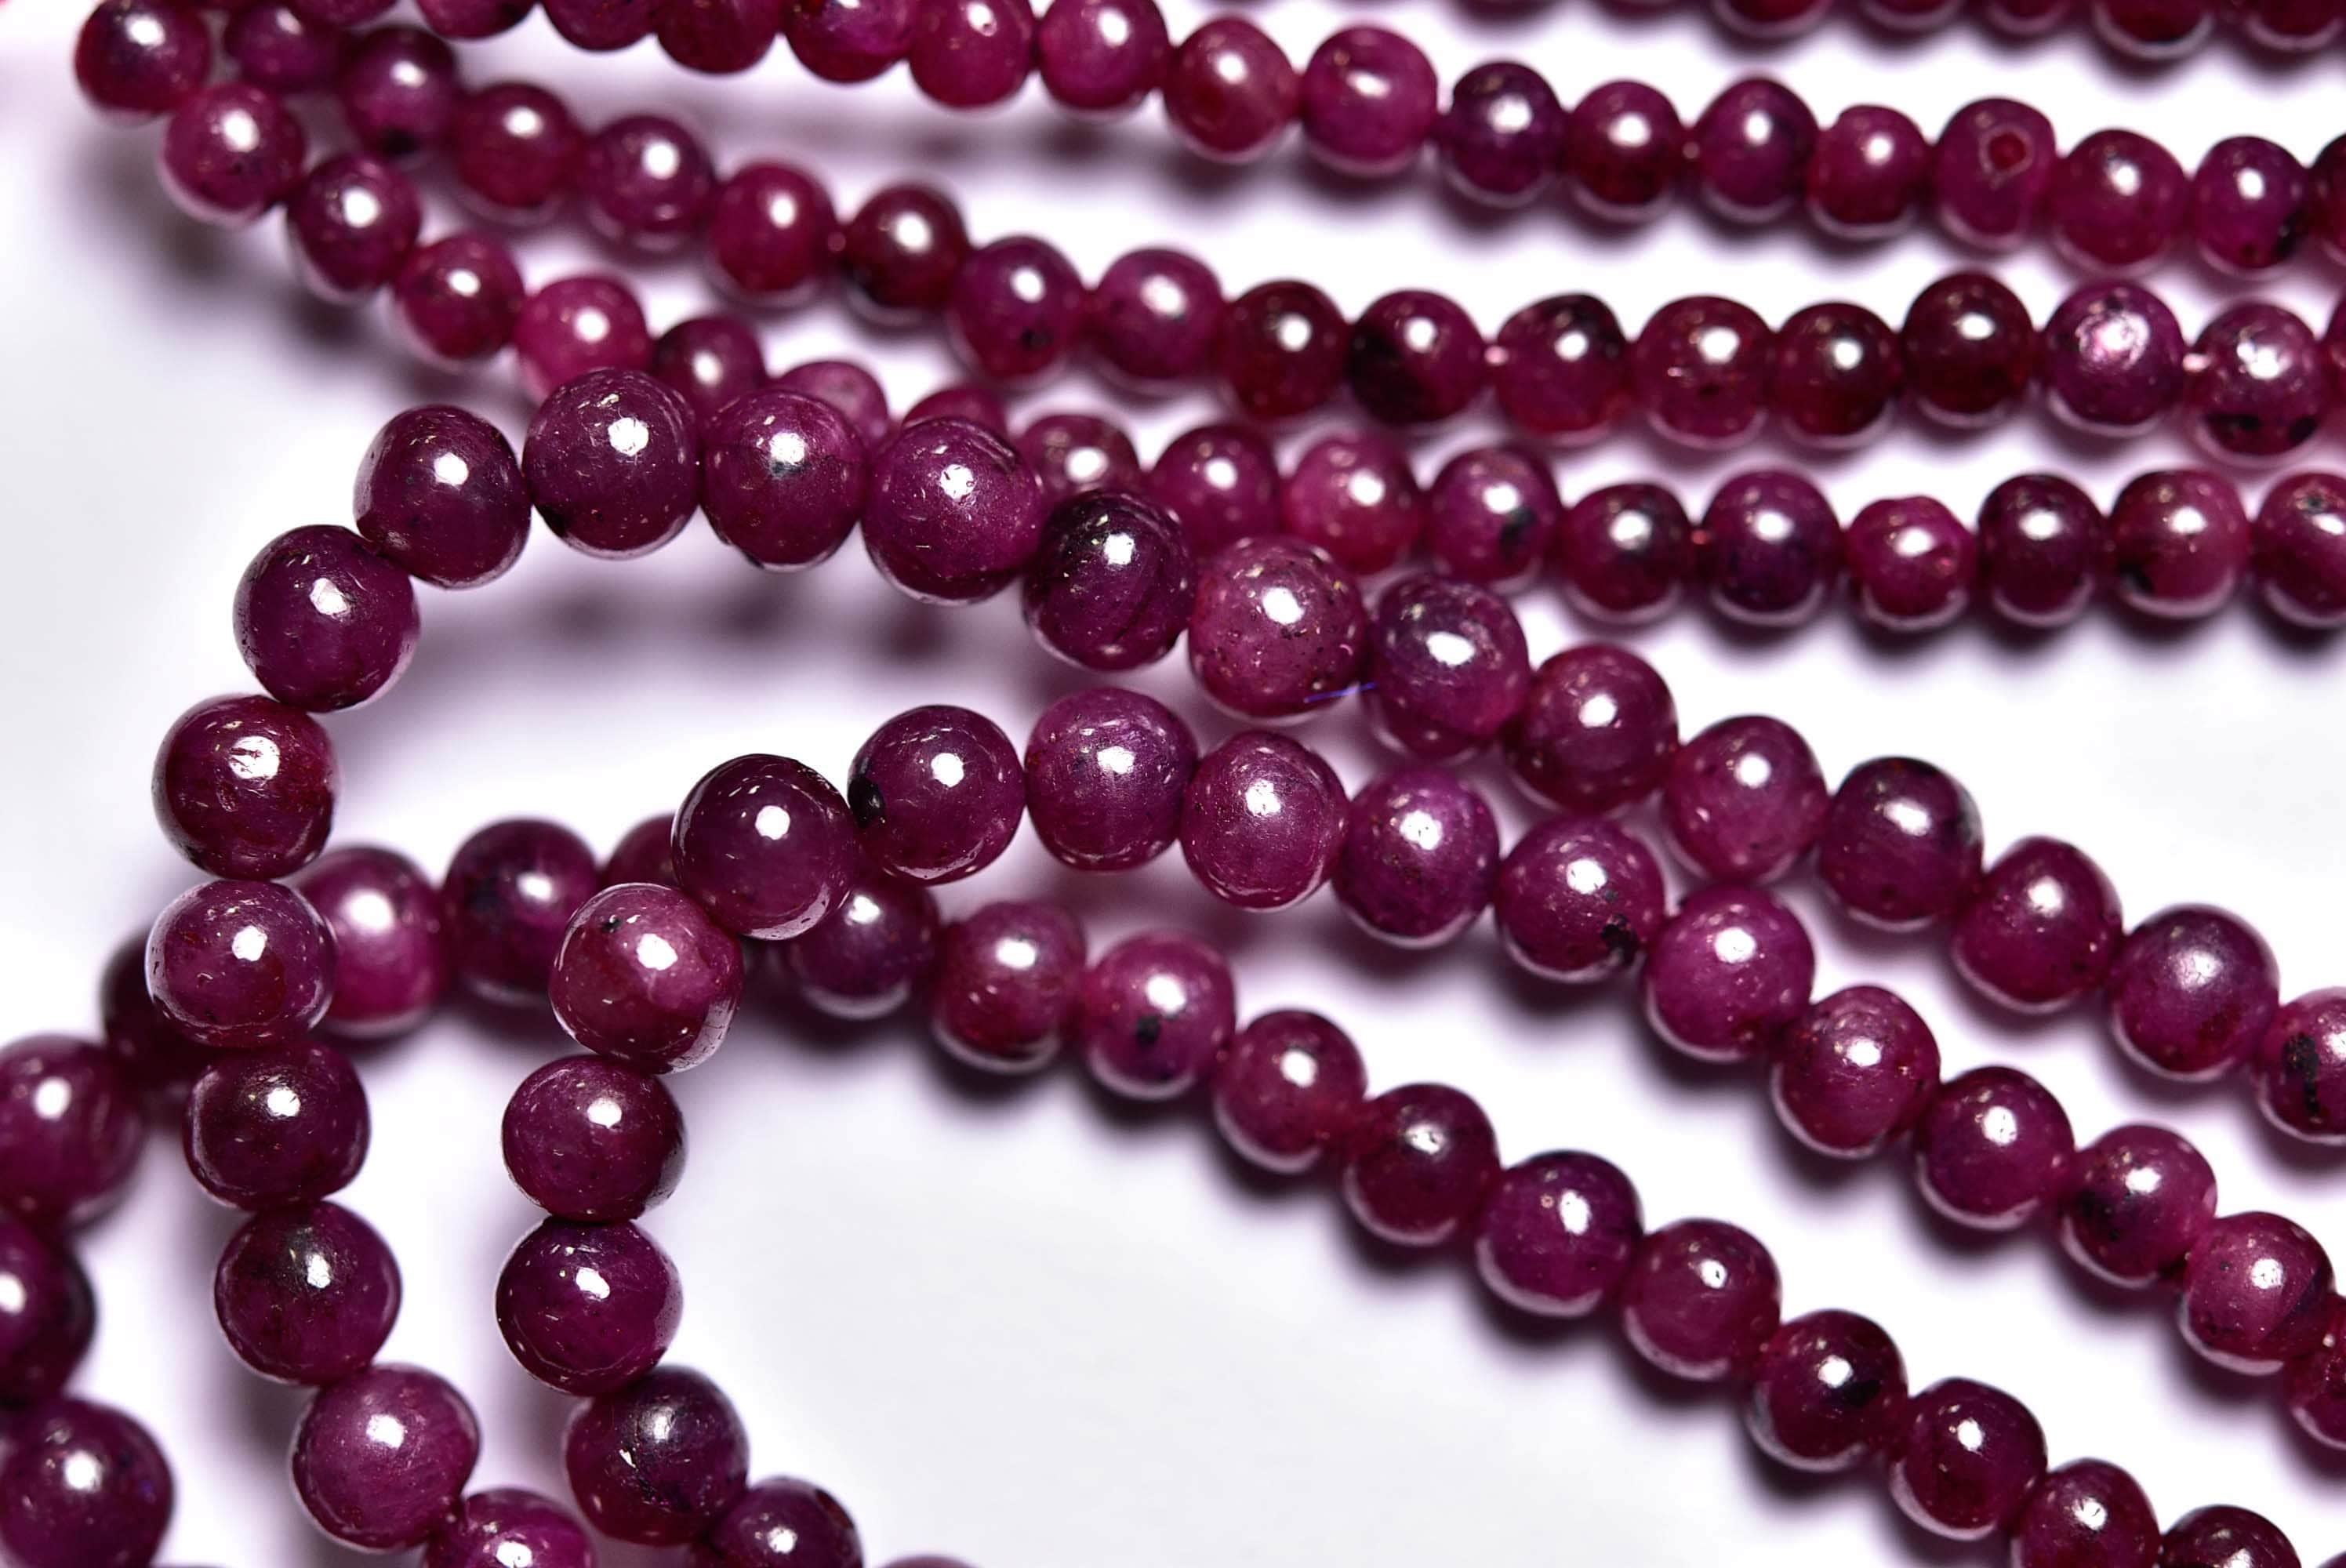 Ruby Round Bead 16 Inches,Beautiful Natural Ruby Smooth Round Beads,Size is 3.50-4.50mm #688